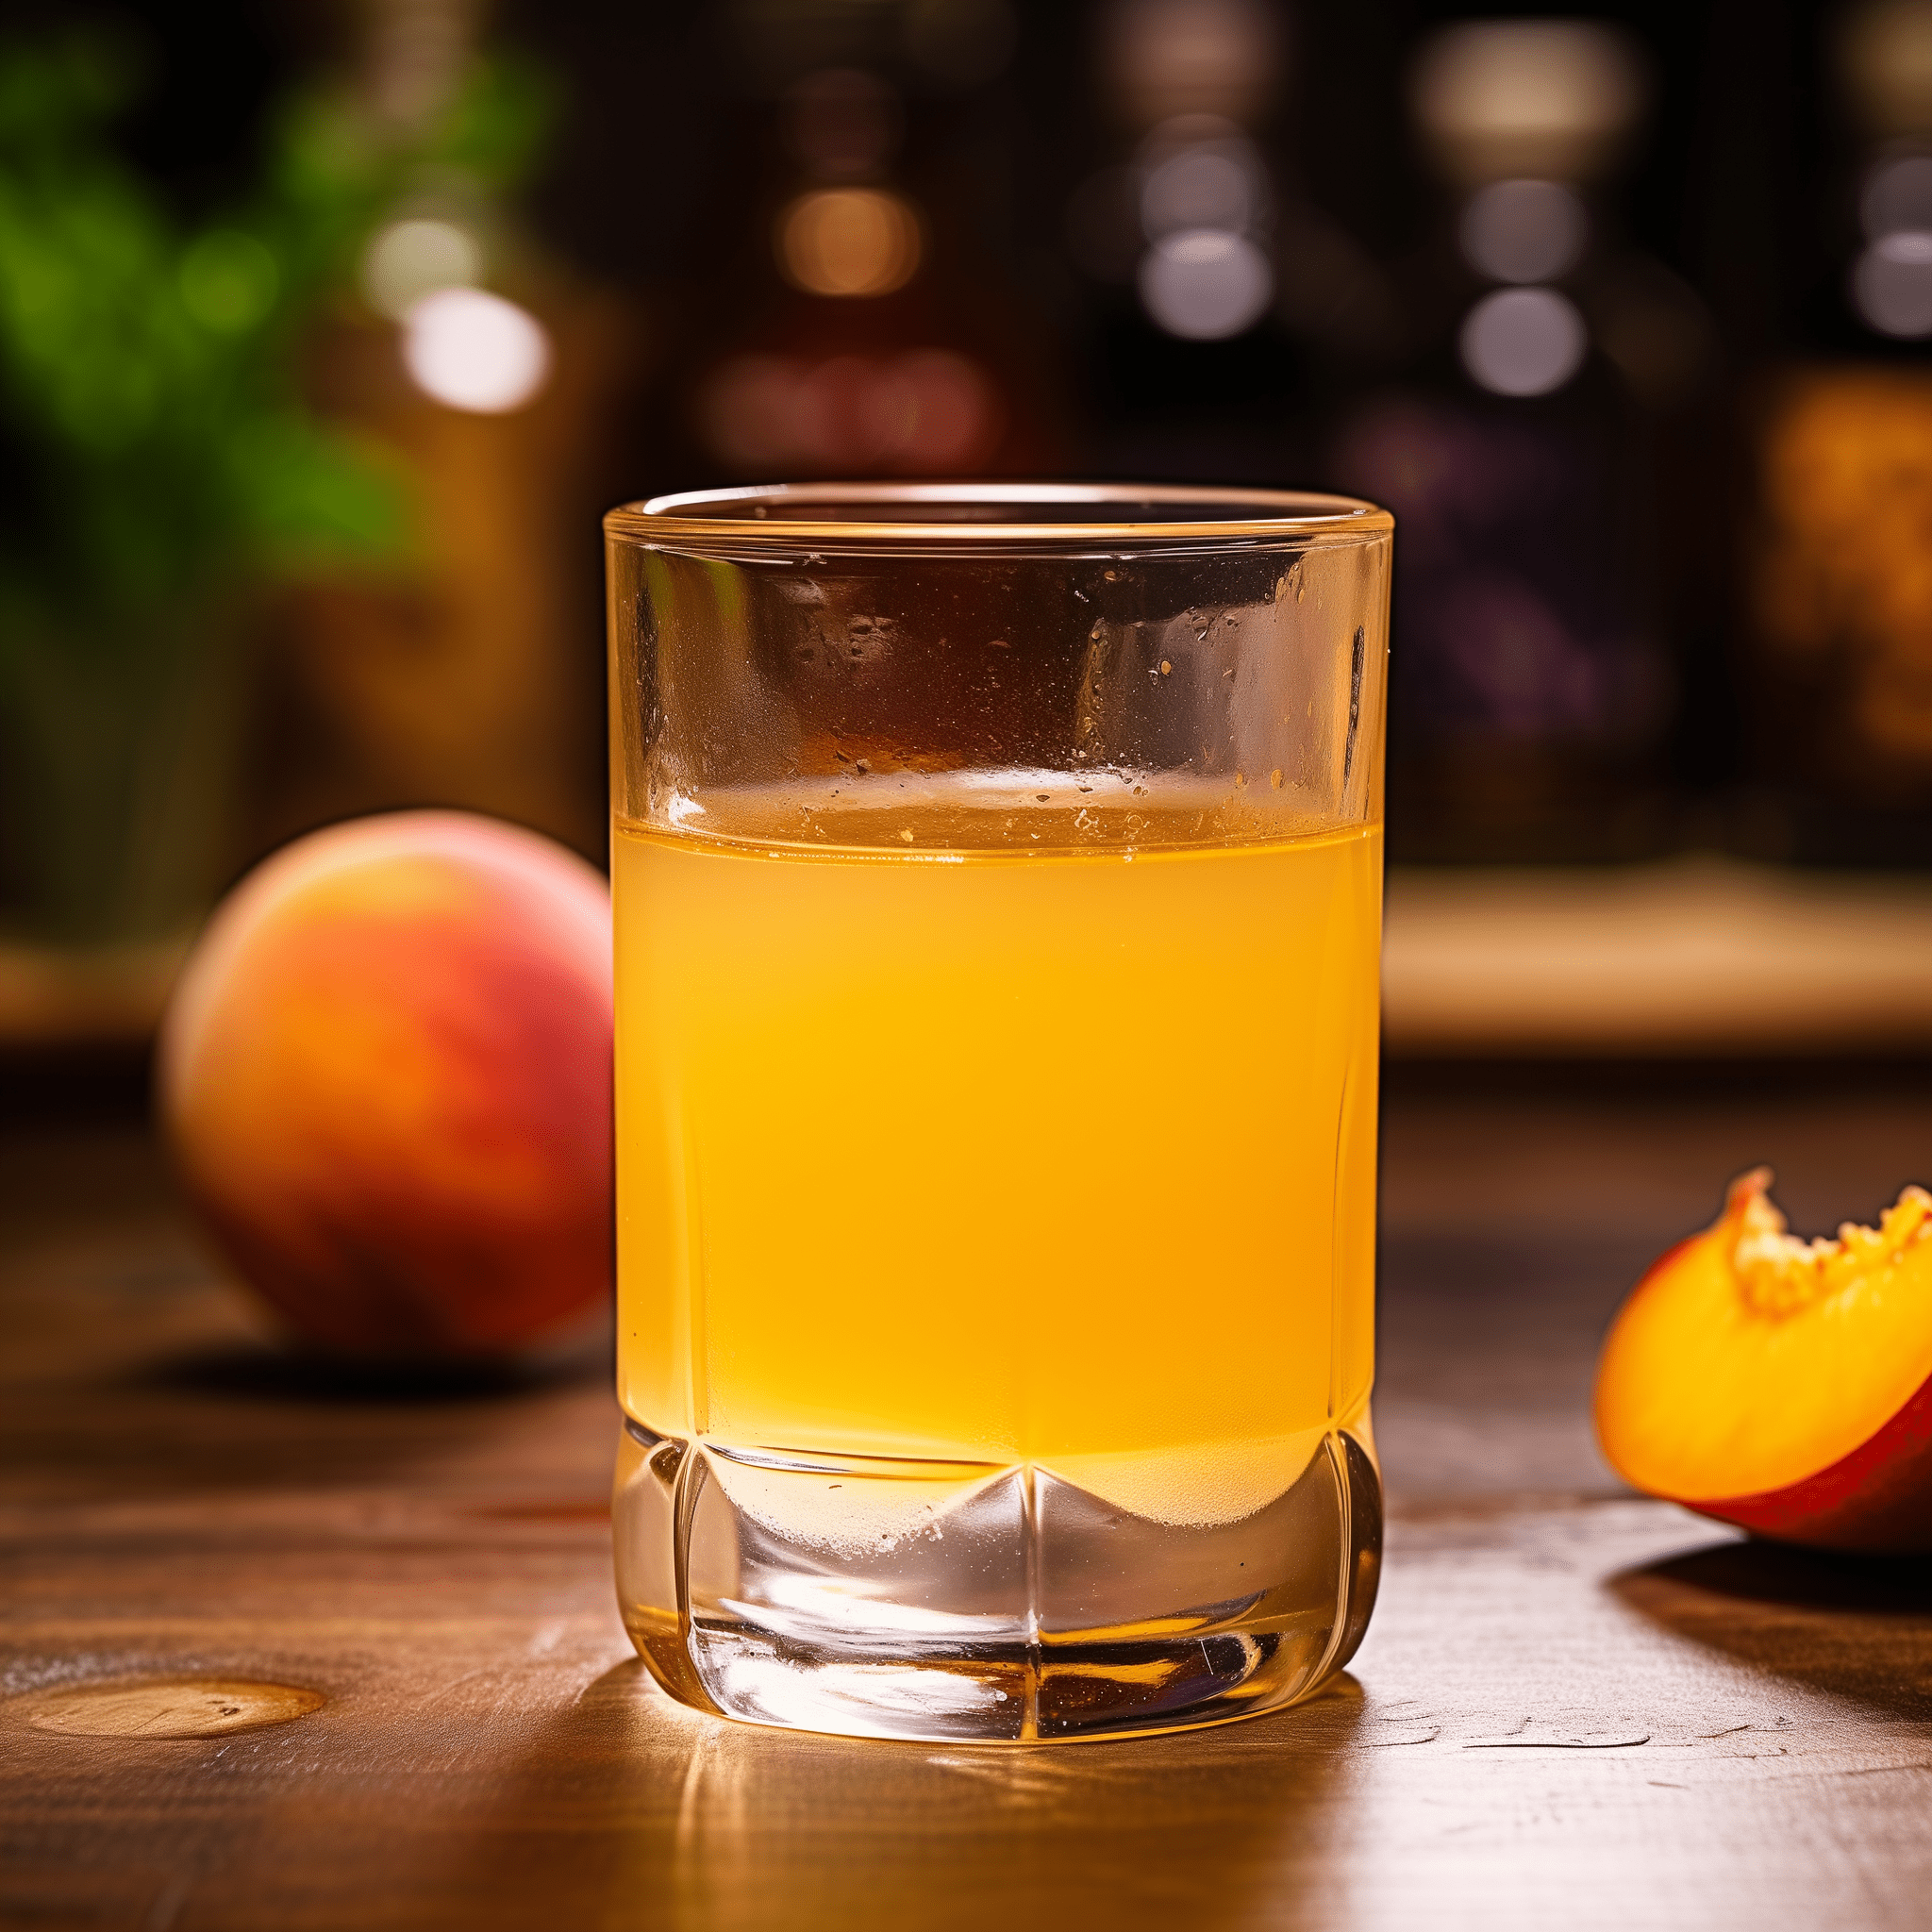 Crack Pipe Cocktail Recipe - The Crack Pipe cocktail is a sweet and tangy mix with a noticeable peachy flavor from the schnapps, complemented by the tartness of the apple sourz. The Red Bull gives it a distinctive energy drink taste and a caffeine kick that is sure to keep you alert.